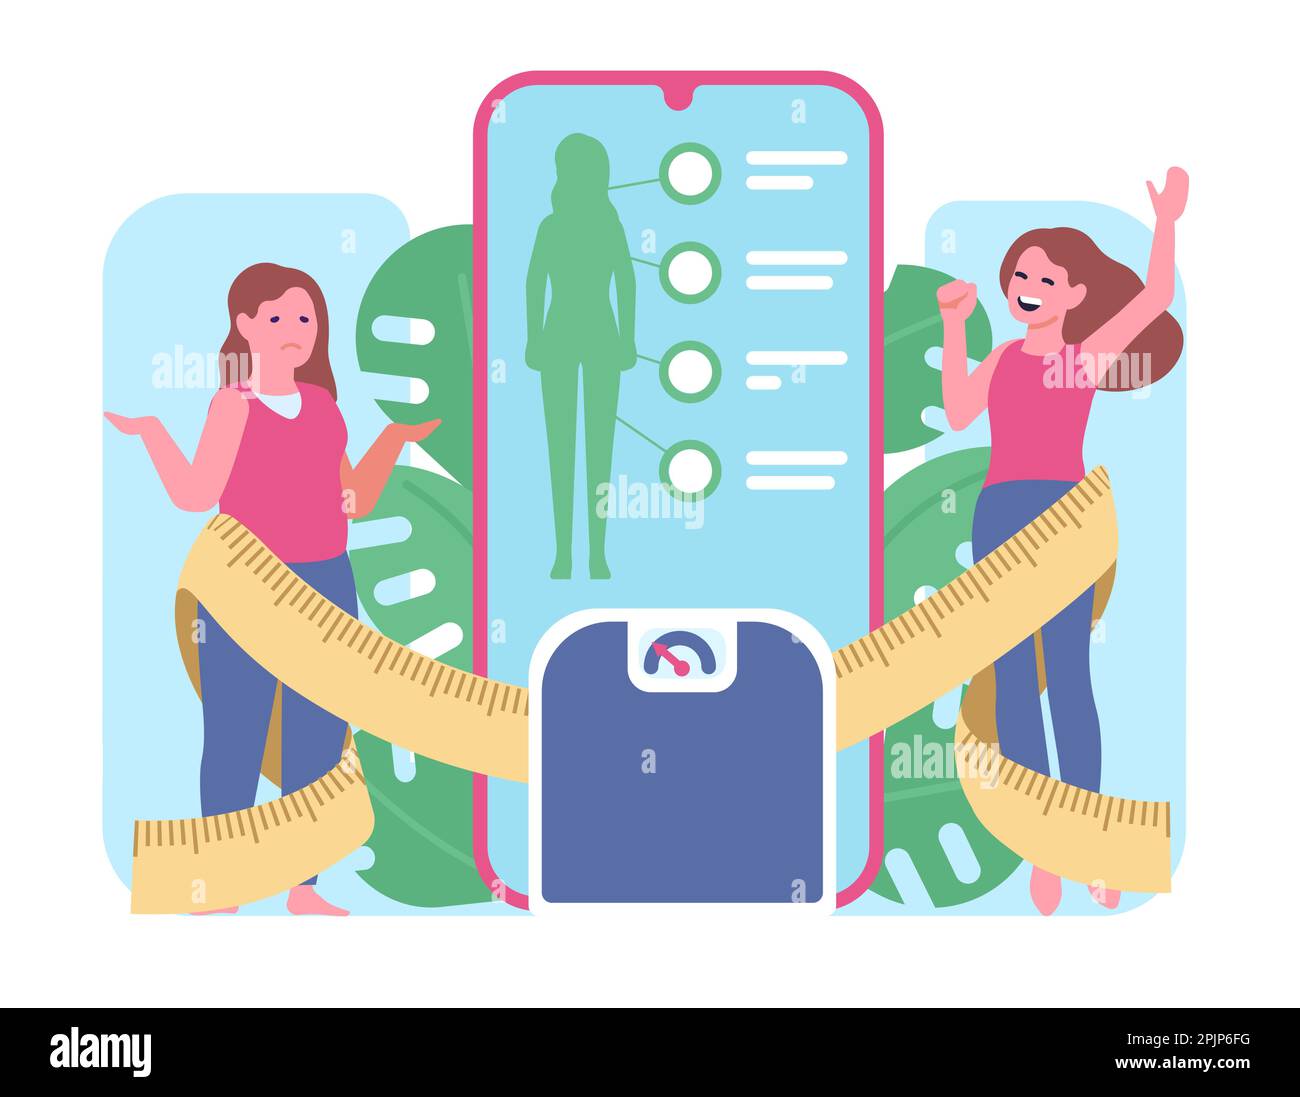 Application in phone for weight loss. Fat girl became slim. Ruler and scales. Happy or sad woman. Device screen. Mobile app. Body slimming. Eating and Stock Vector